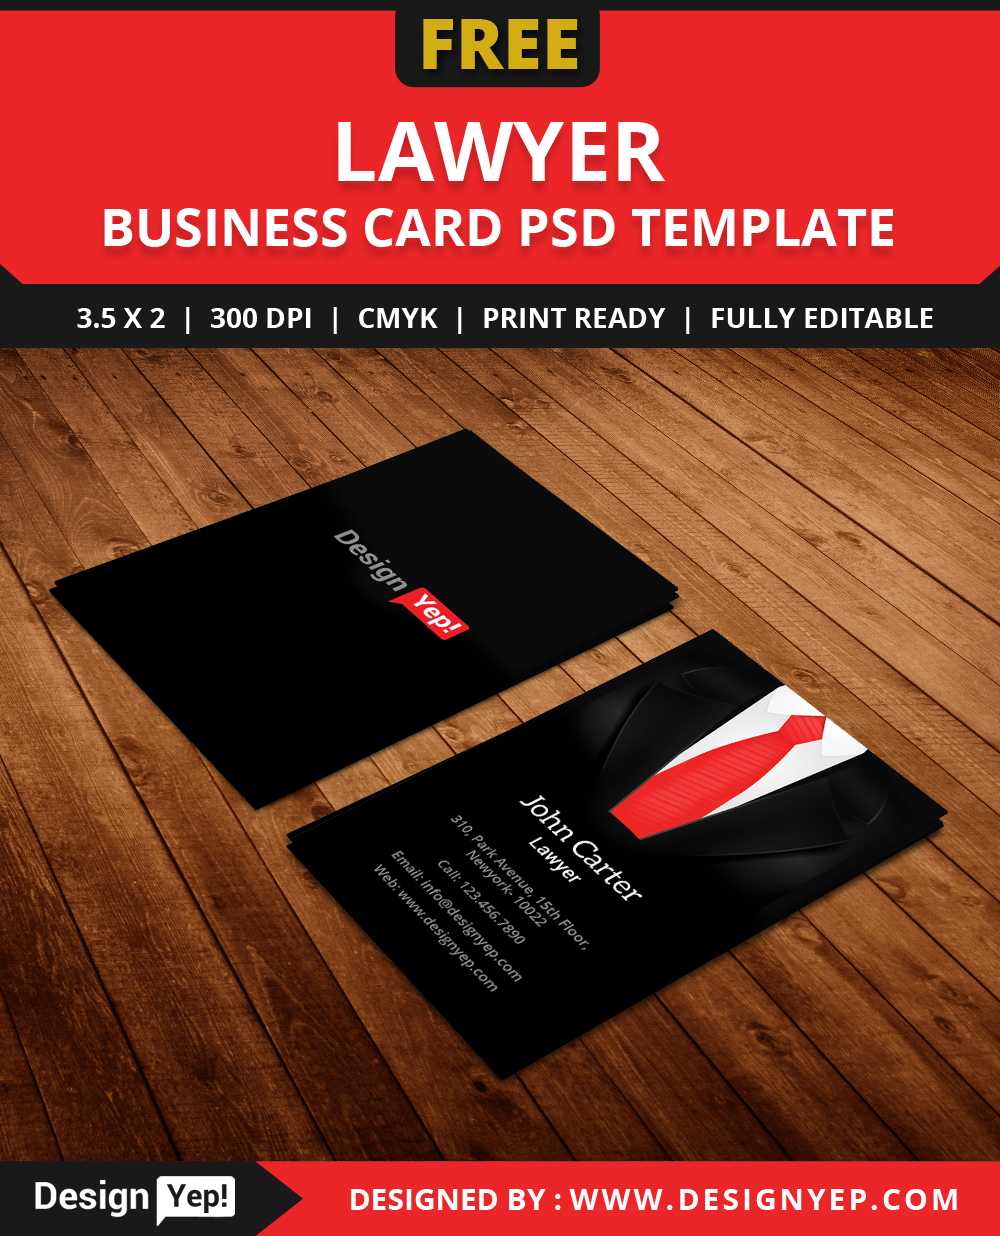 Free Lawyer Business Card Template Psd – Designyep Intended For Call Card Templates